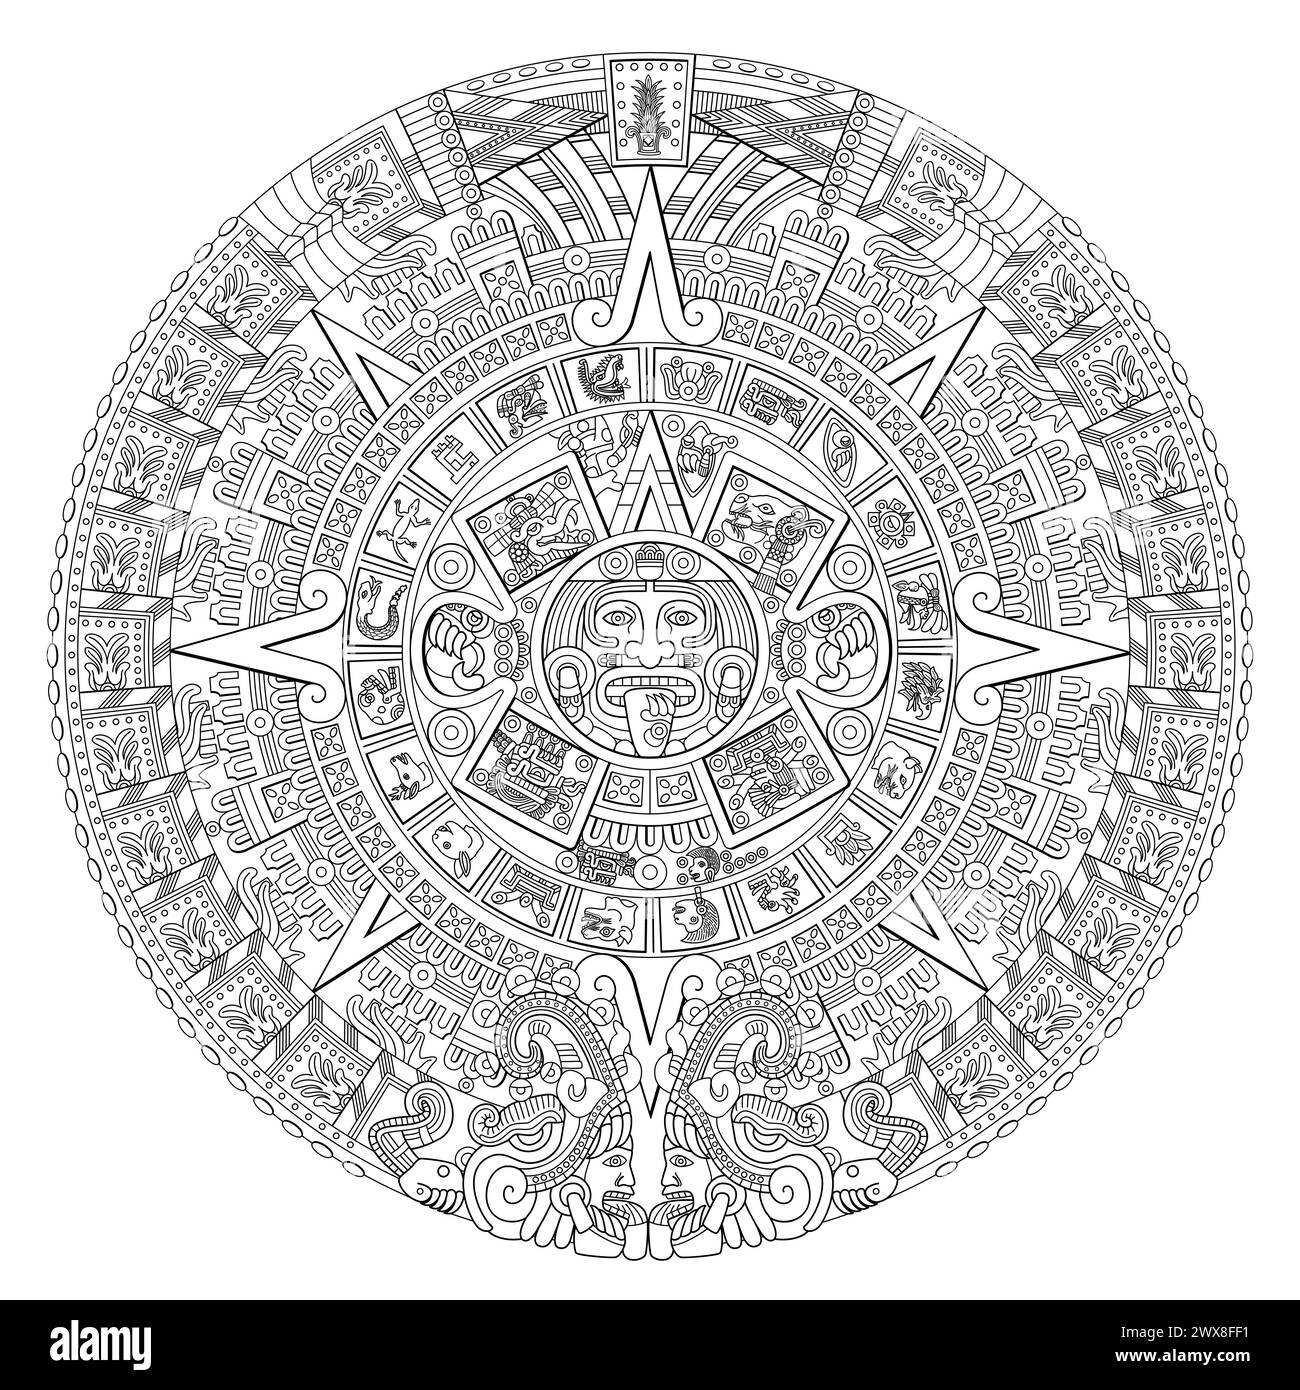 Aztec Sun Stone. At the center of the disc appears the glyph called movement with the face of solar deity Tonatiuh, surrounded by the 20 day signs. Stock Photo